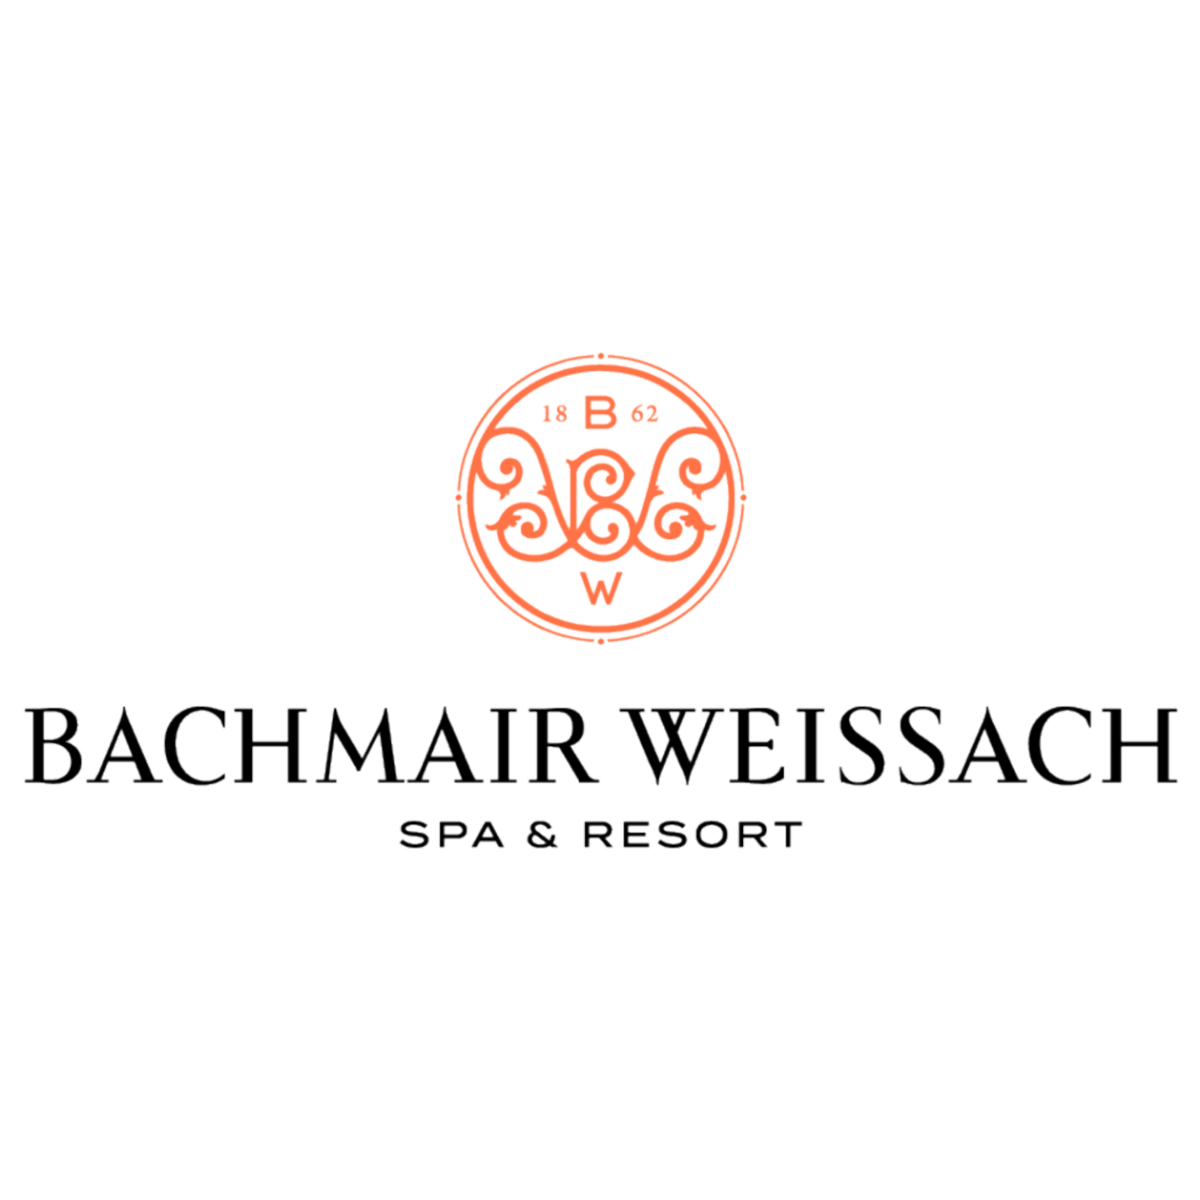 Bachmair Weissach Case Study Future Service Sells